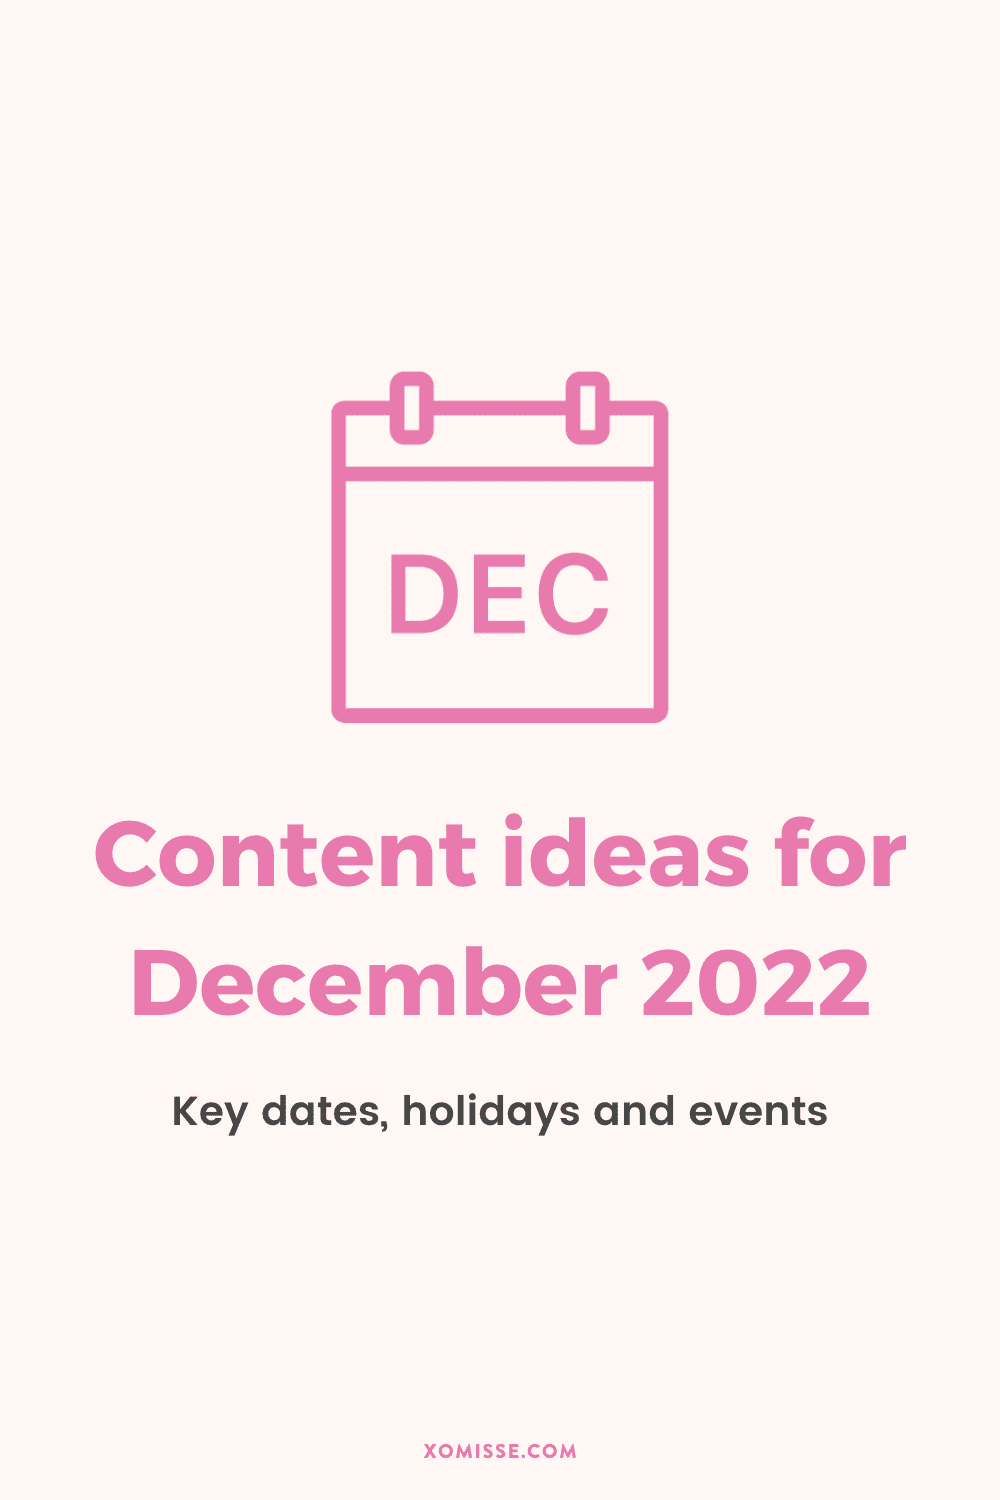 Content ideas for December 2022